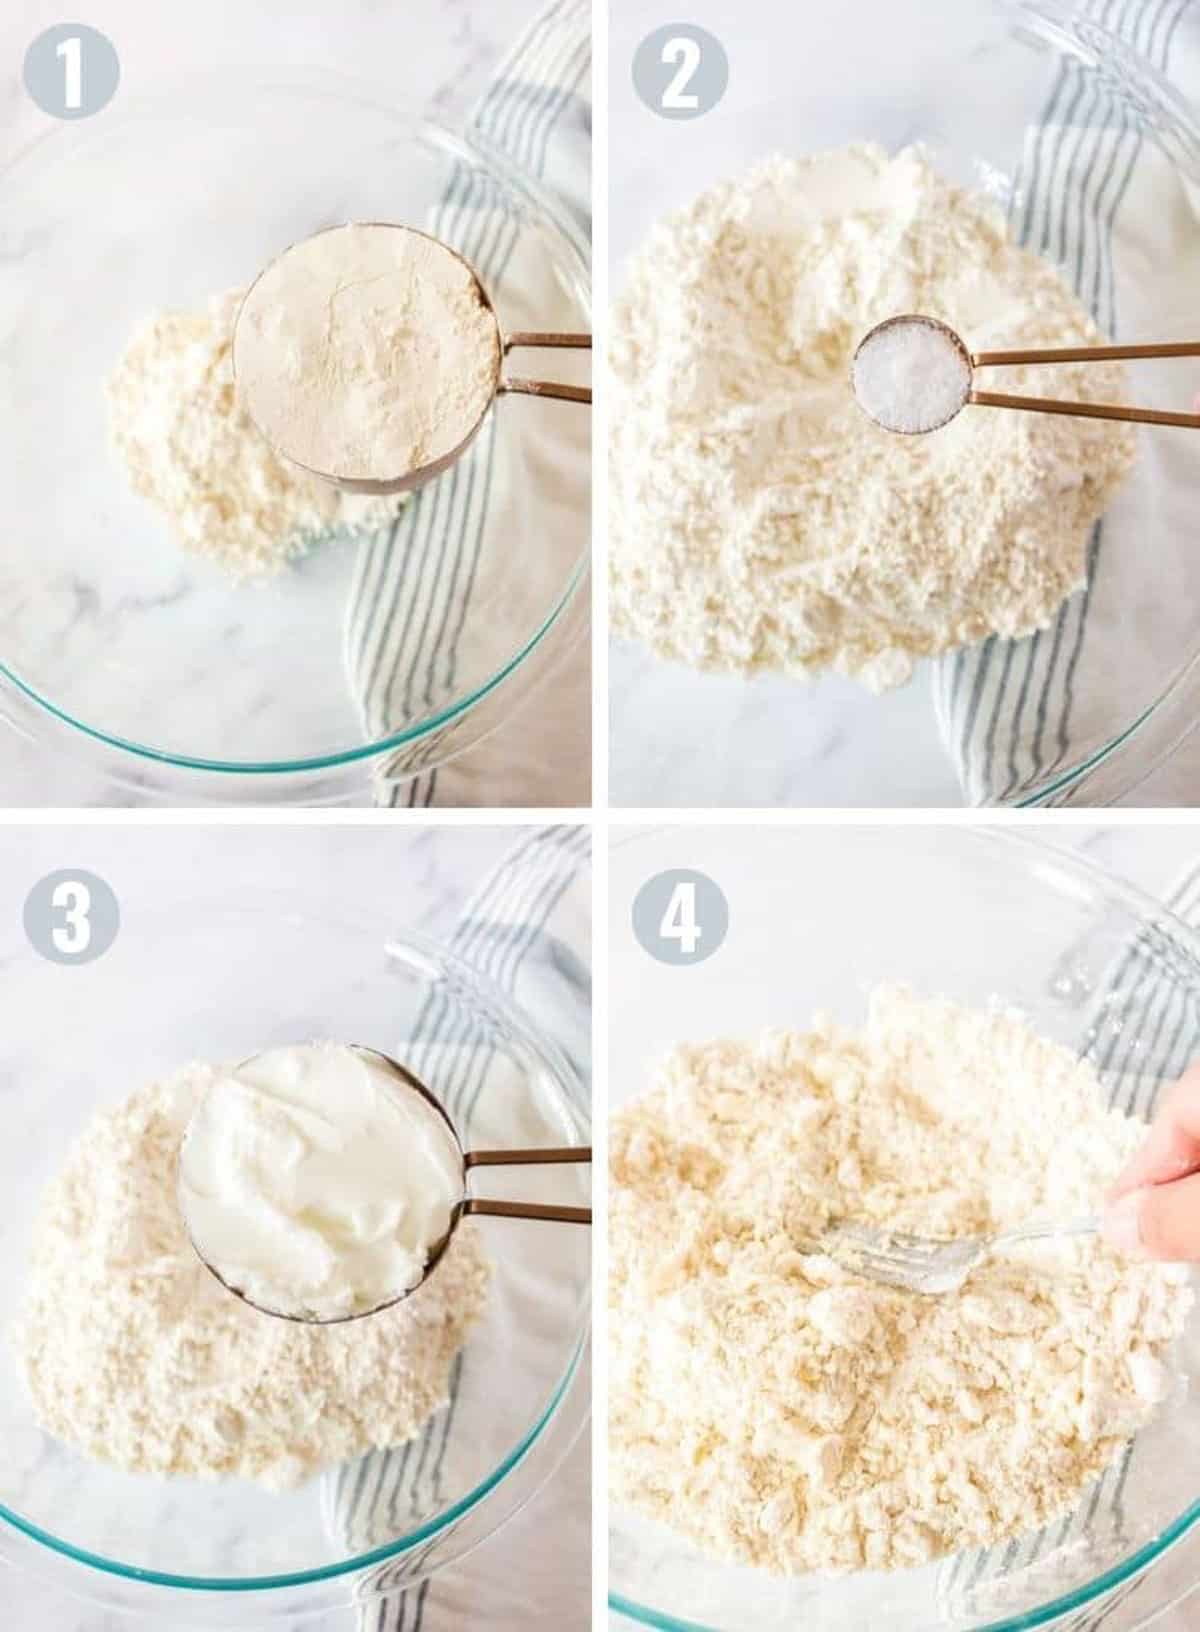 Adding ingredients for a homemade pie crust into a mixing bowl.